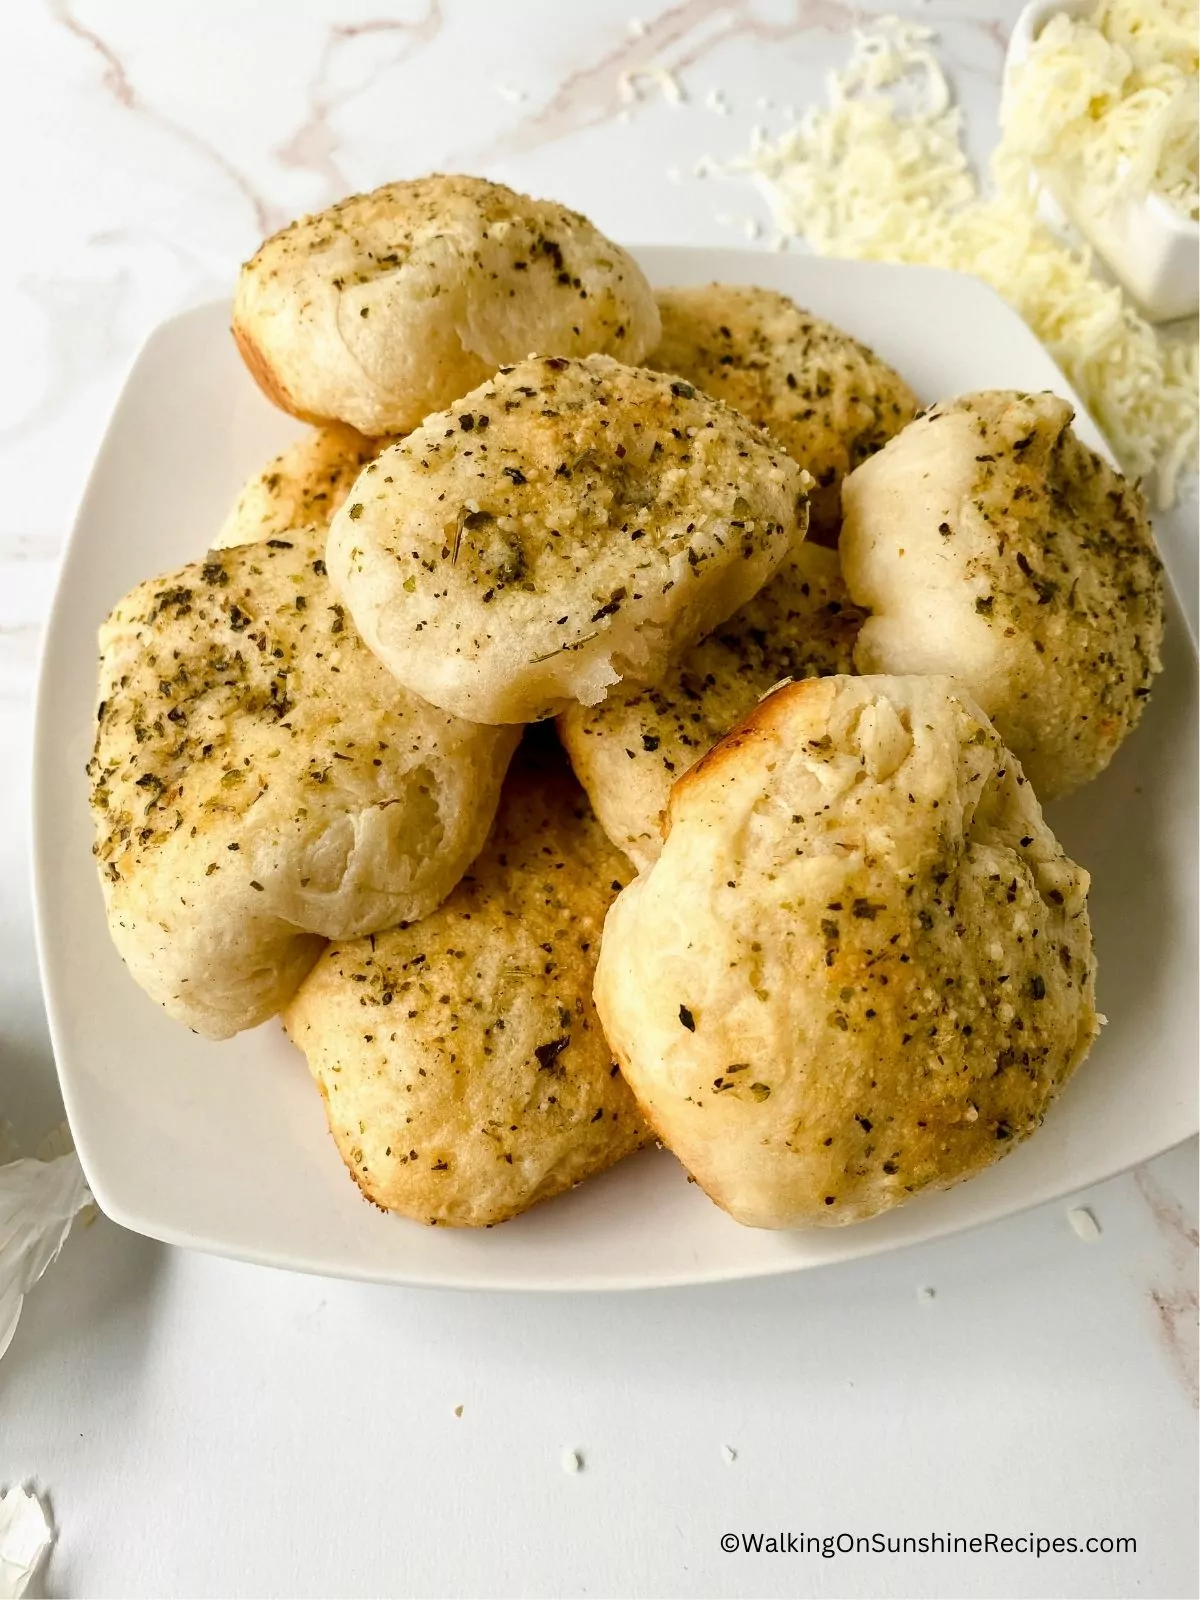 Refrigerator biscuits baked with mozzarella cheese on white plate.